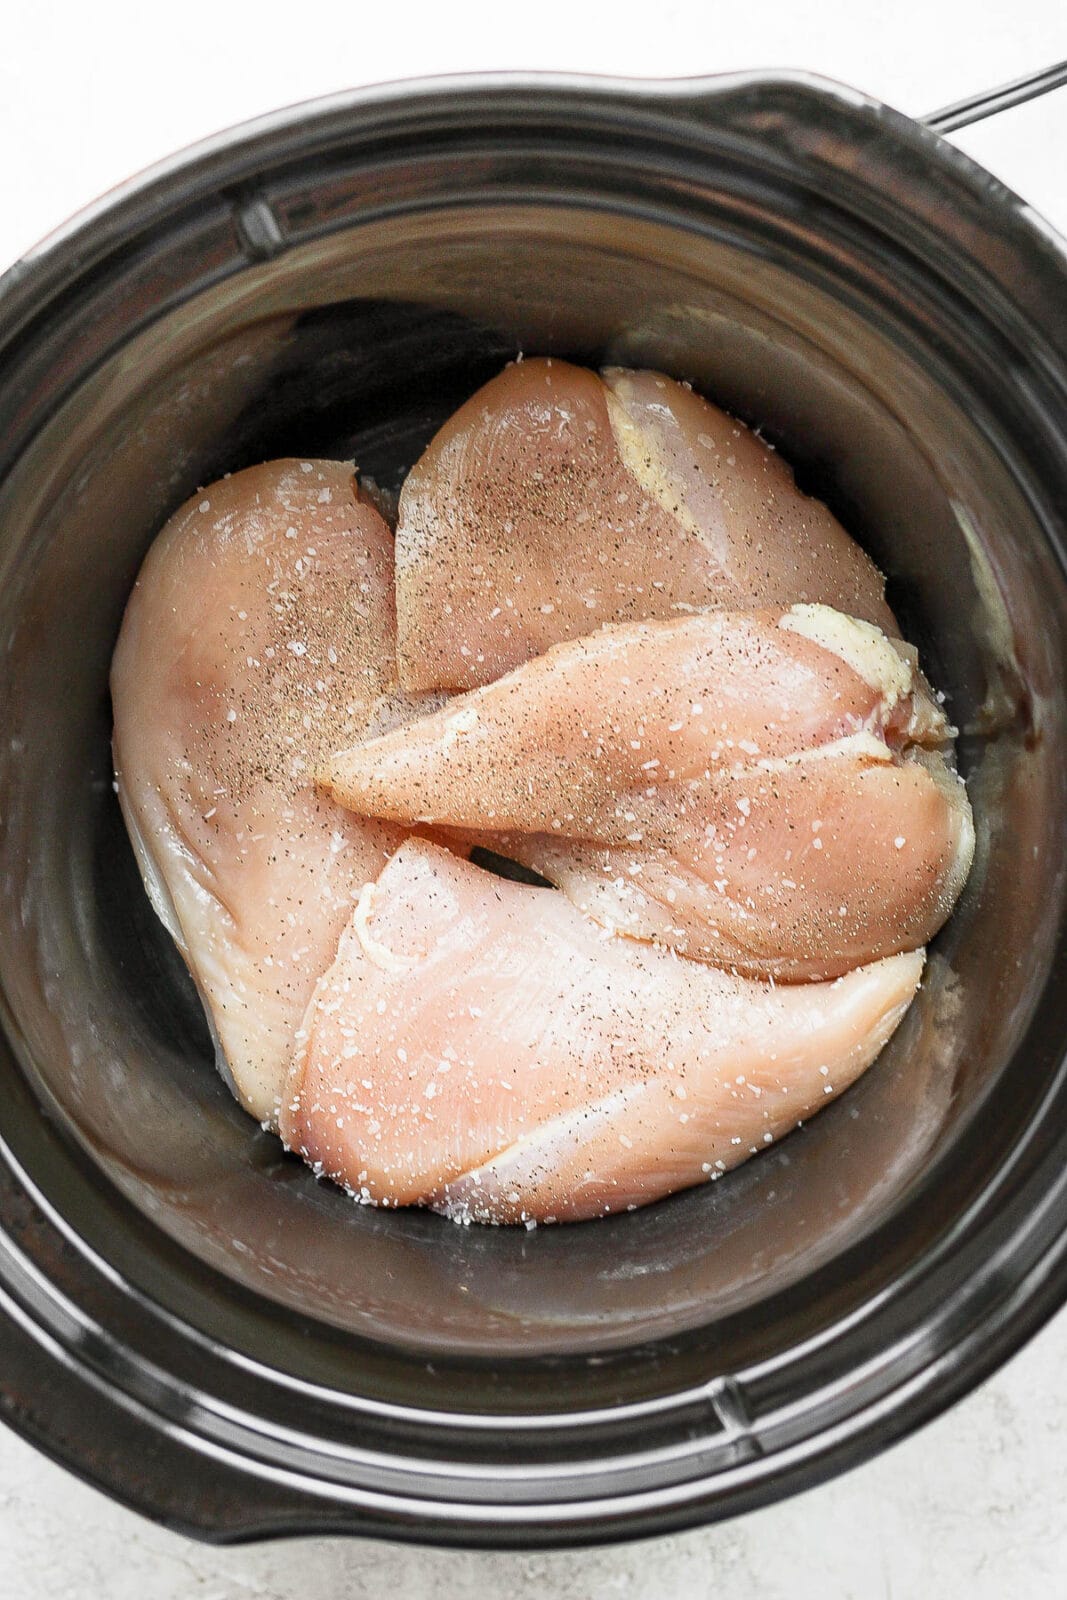 Raw chicken breasts in a slow cooker with salt and pepper.